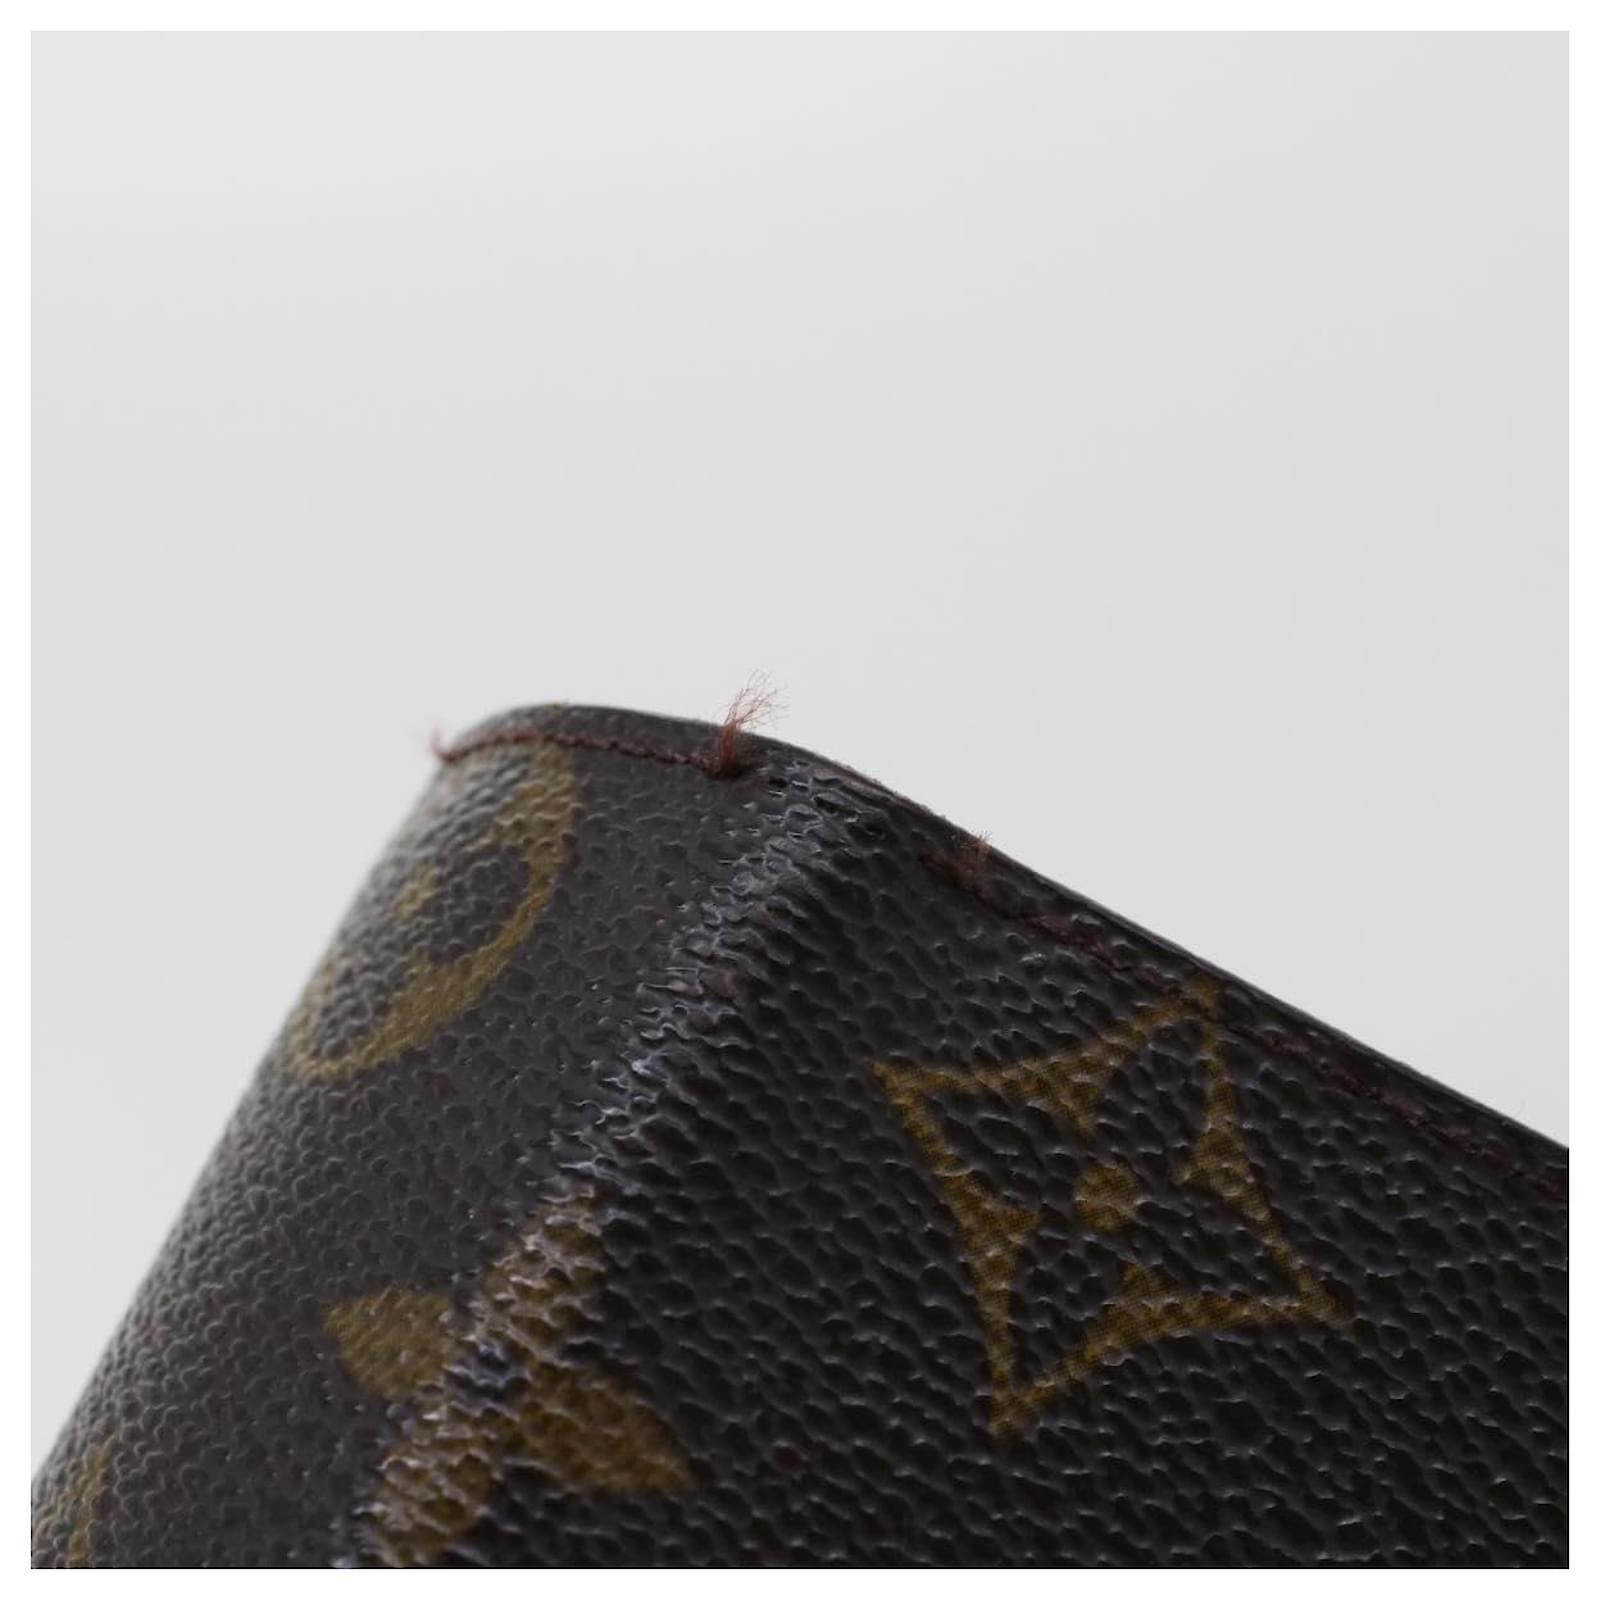 Louis Vuitton, Other, Louis Vuitton Lv Monogram Agenda Pm Day Planner  With Box And Dust Bag